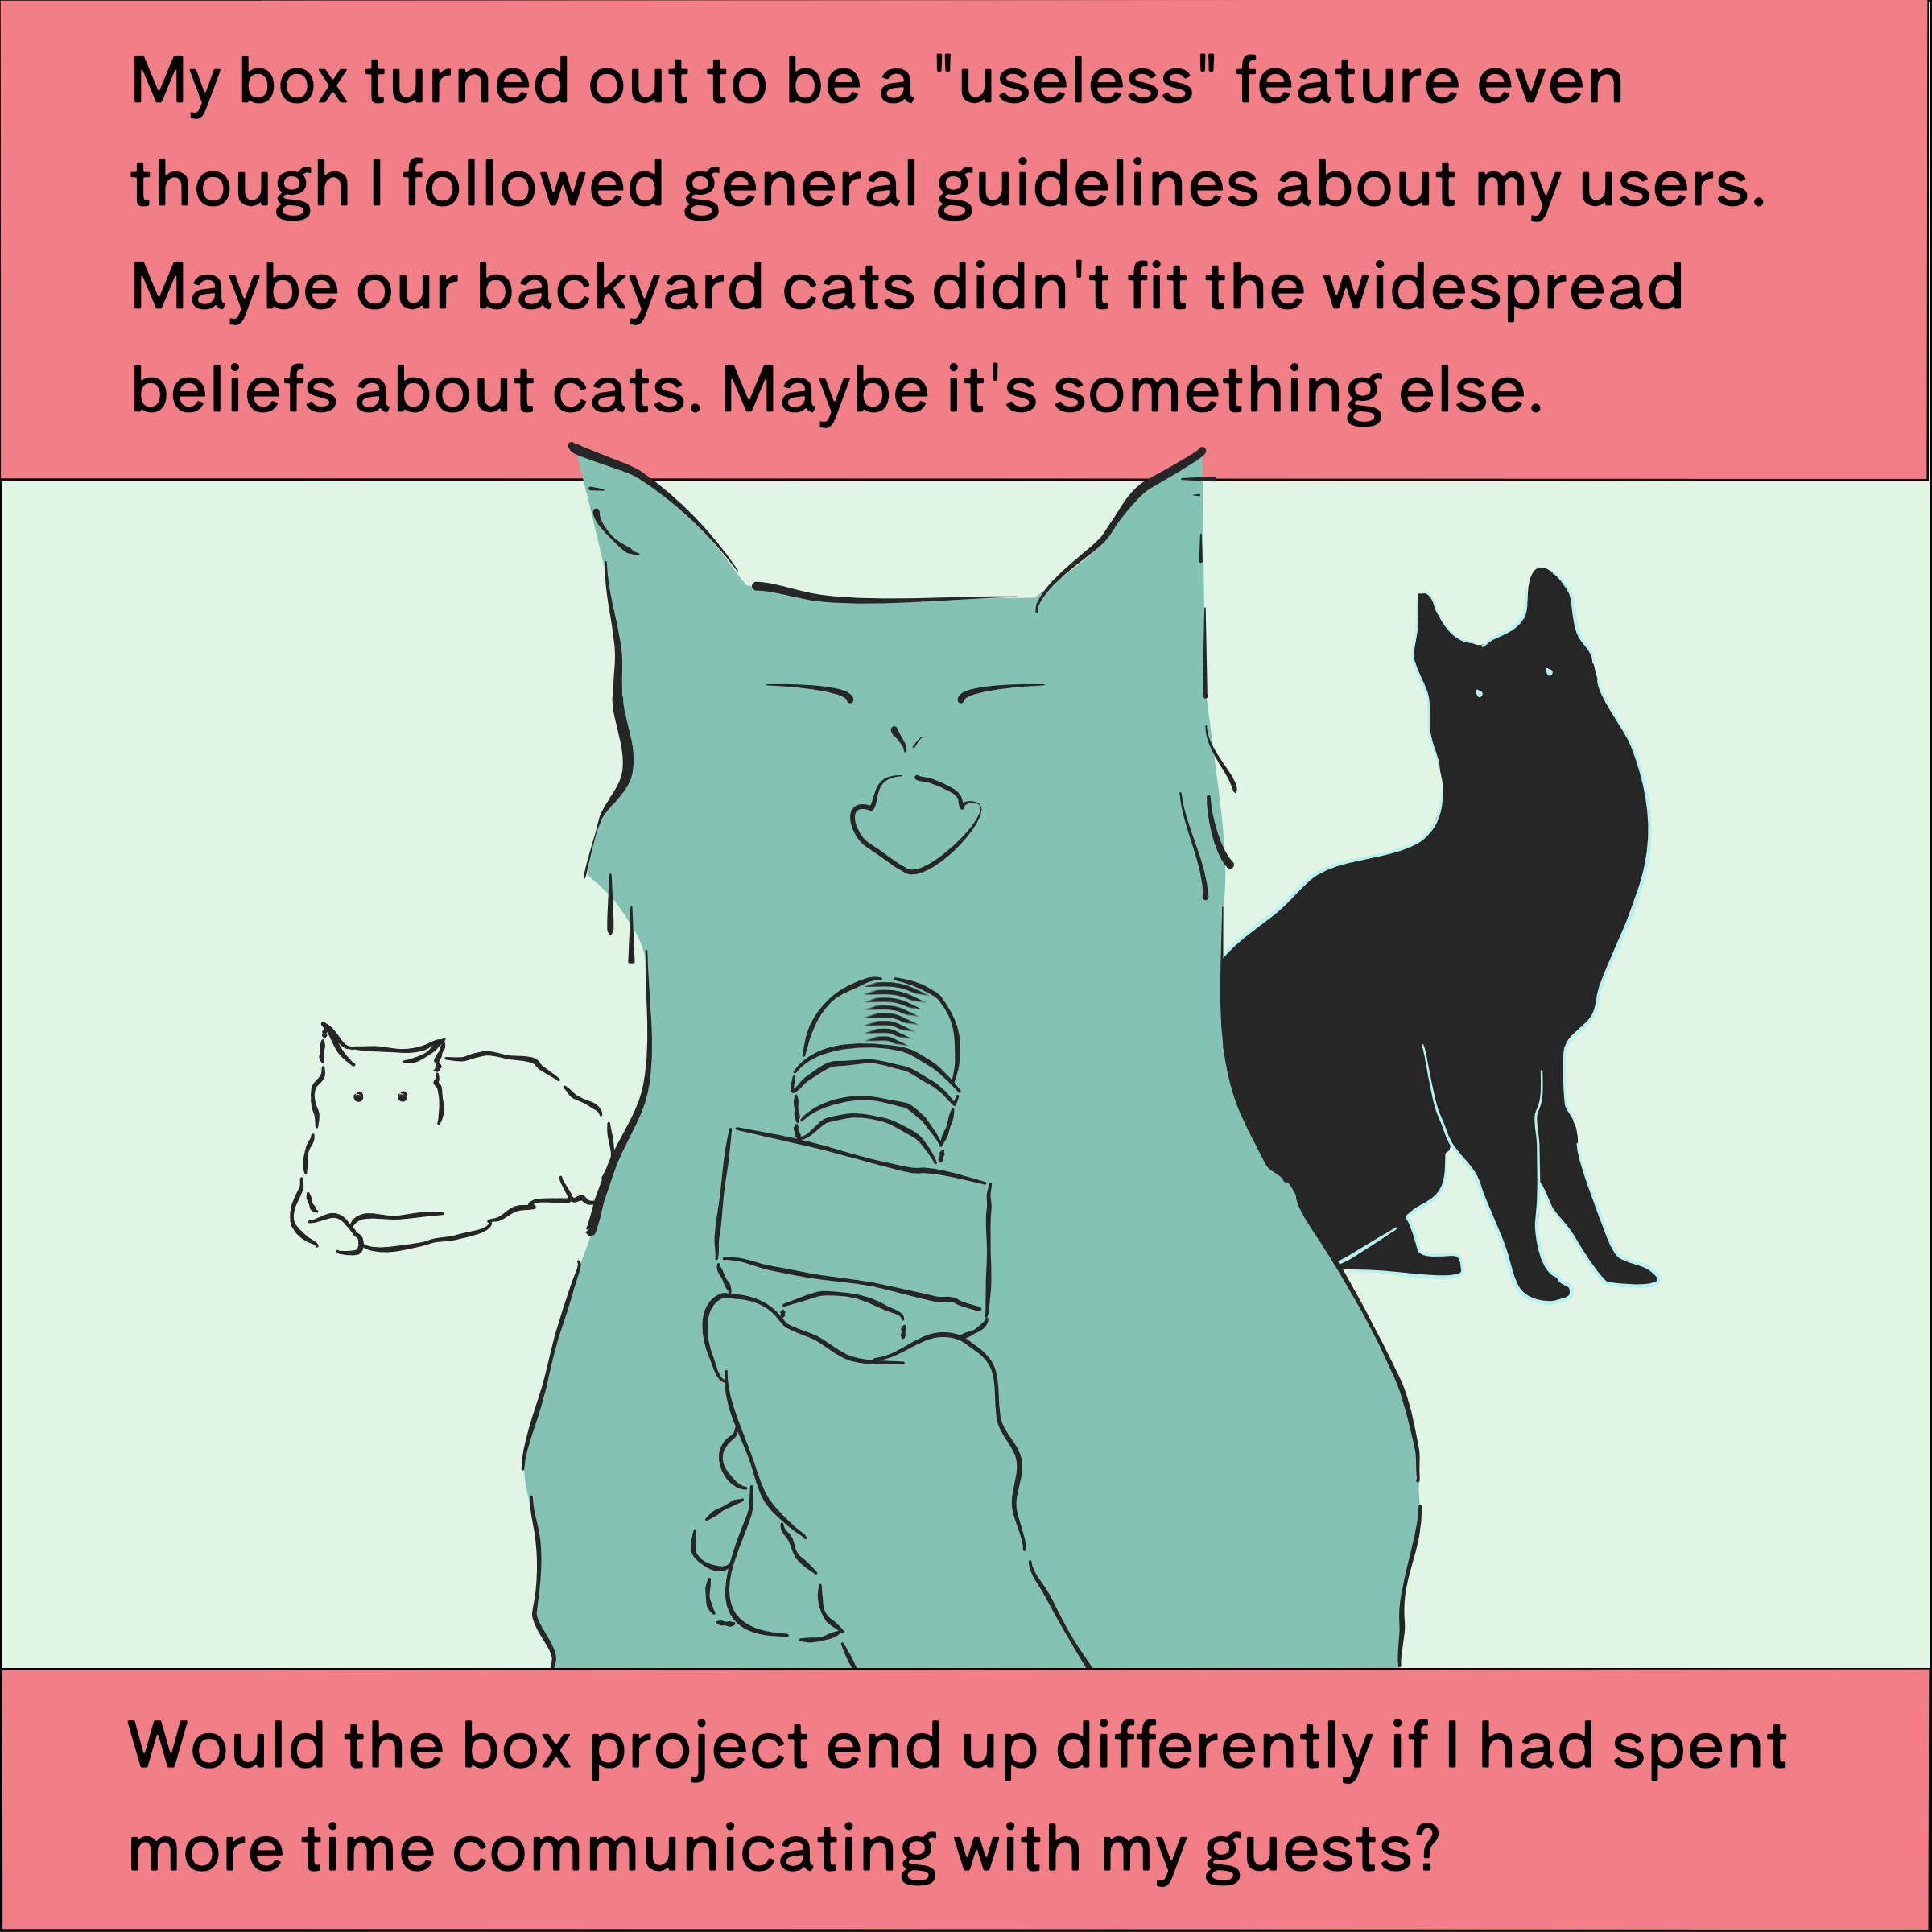 My backyard amenity project was a bad design even though I followed general guidelines about my users. The specific cats who visited our backyard somehow didn't fit the widespread expectation about cats. Would the box project end up differently if I had spent more time communicating with my guests?